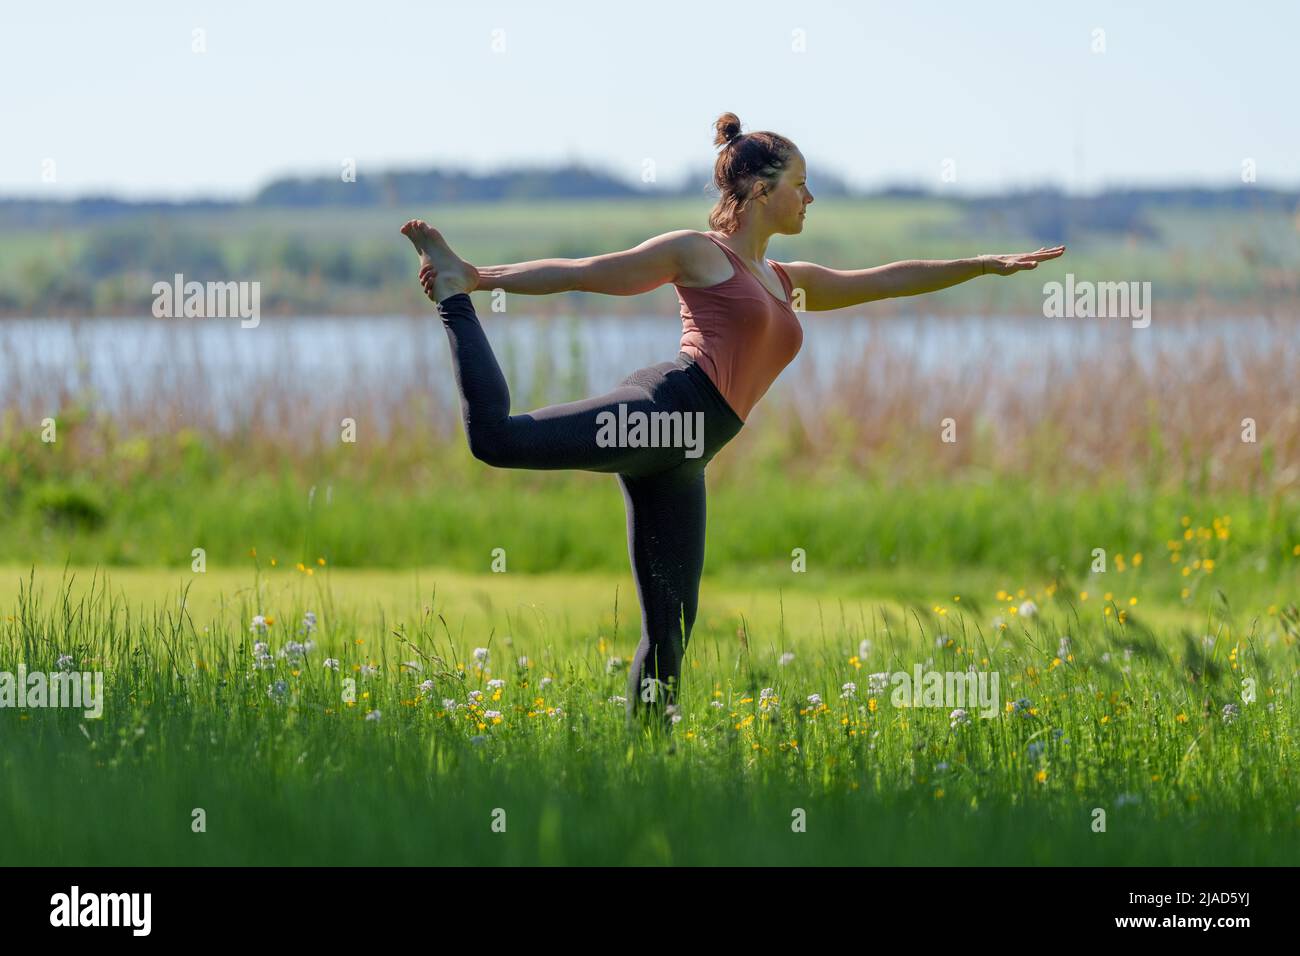 Woman standing on one leg doing dancer pose by Wallersee, Salzburg, Austria Stock Photo